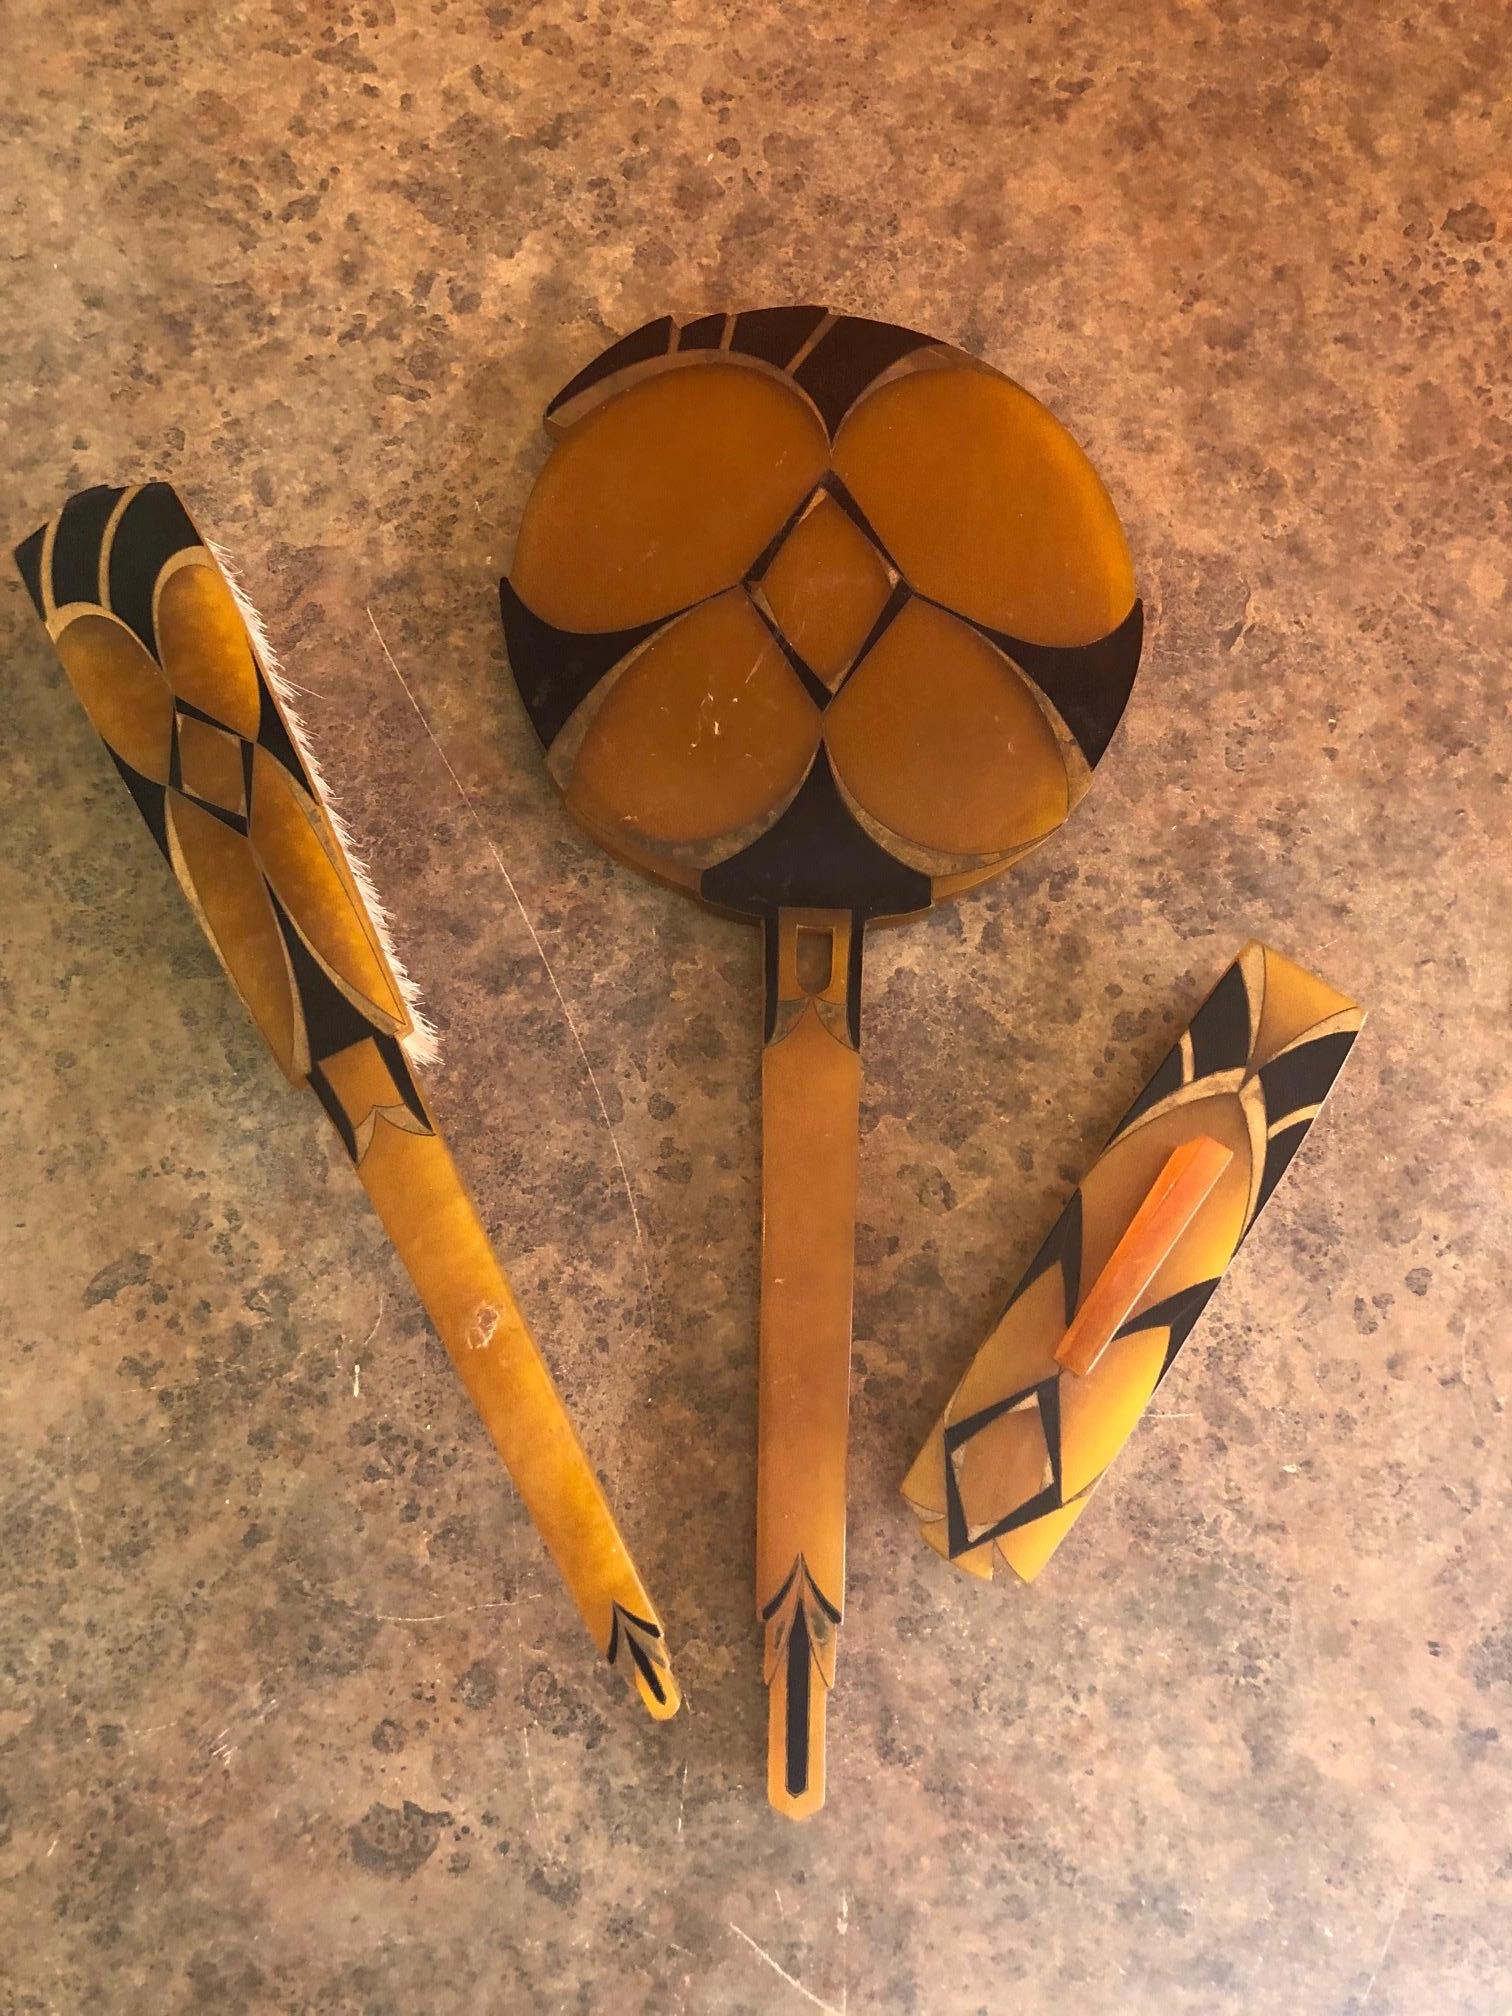 Three piece Art Deco vanity / dresser set which includes a hand mirror, hair brush and nail buffer by La Parfaite of France, circa 1930s. The set is made of agalin which is a close cousin to bakelite in is in good to fair vintage condition. There is